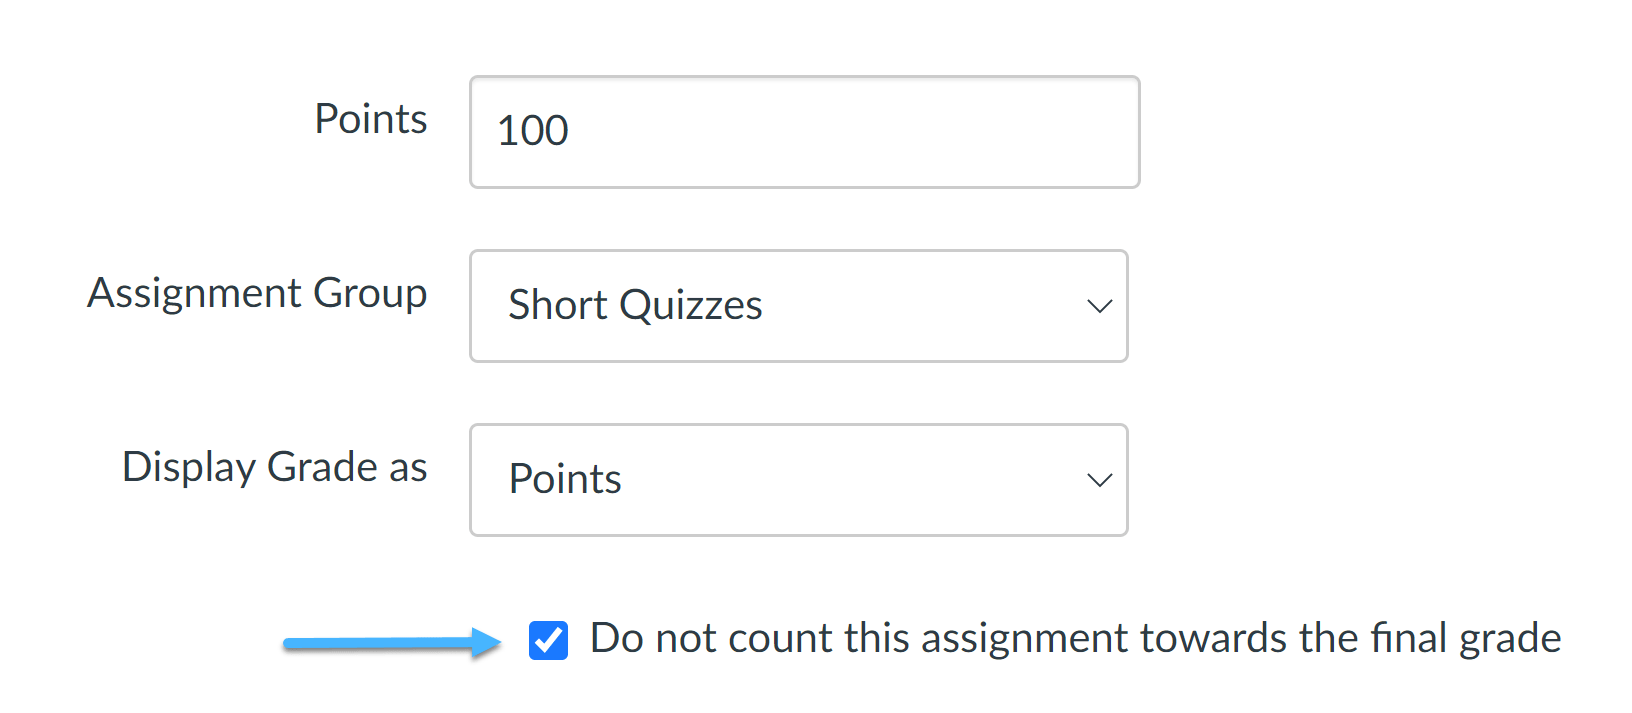 Do Not Count This Assignment Toward Final Grade Checkbox Checked